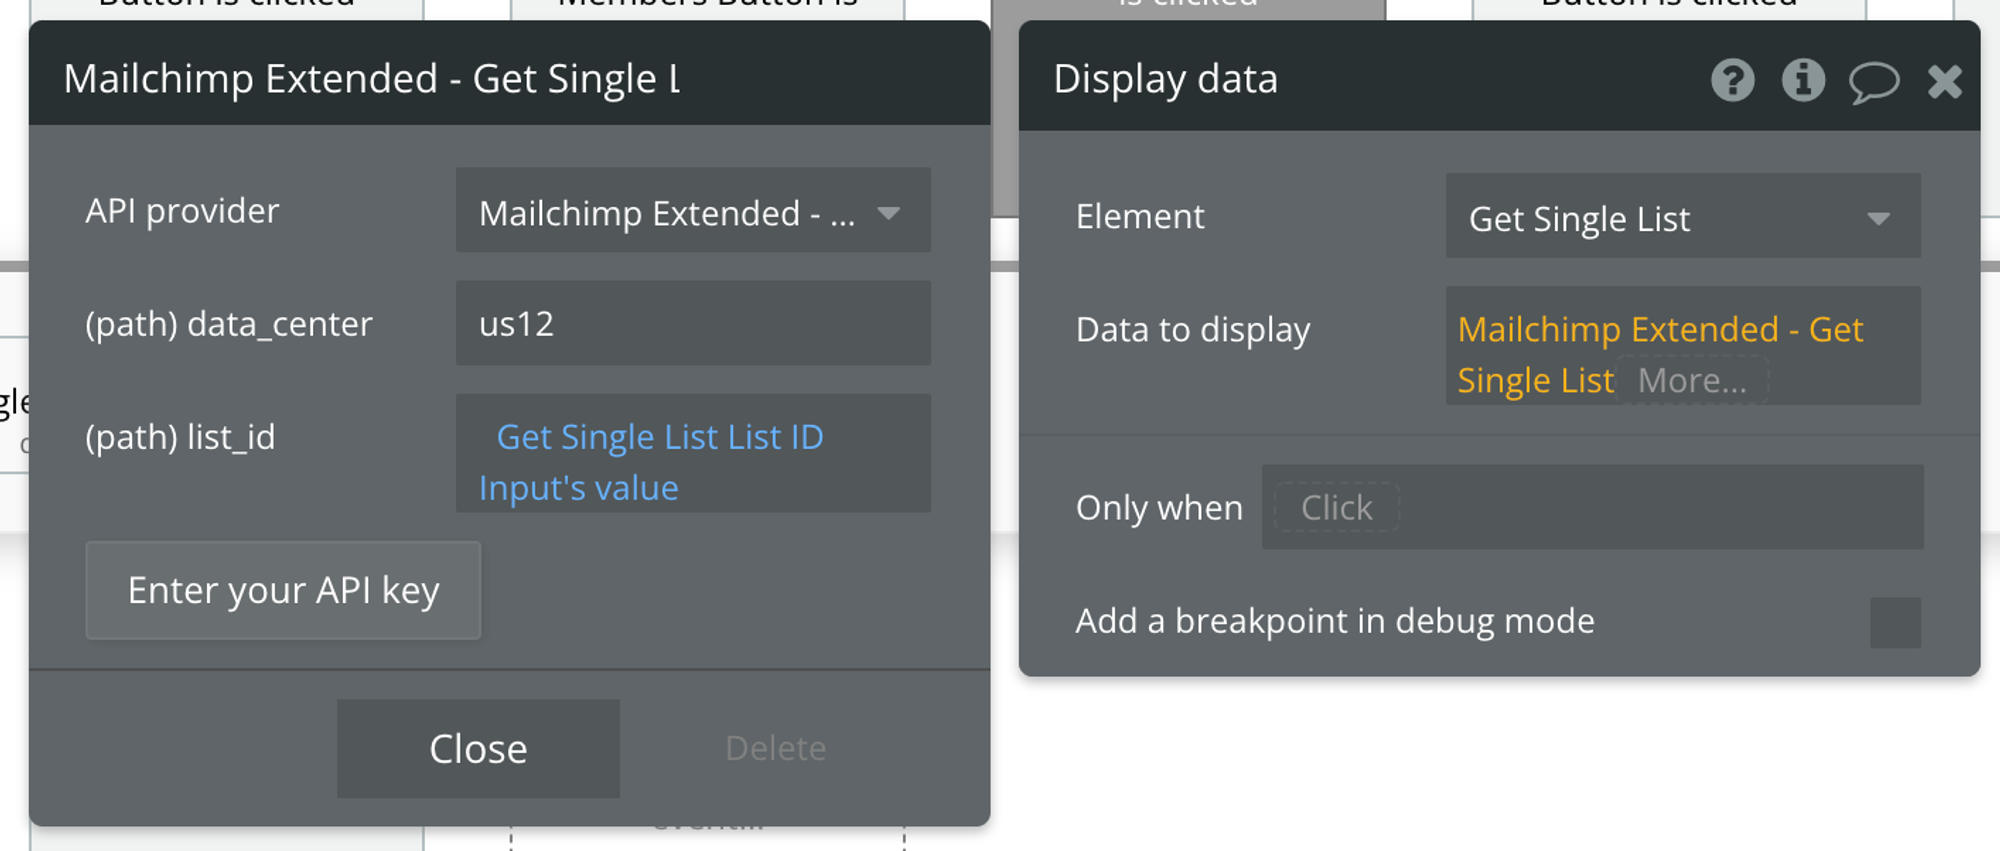 Select Mailchimp Extended - Get Single List from the API provider dropdown